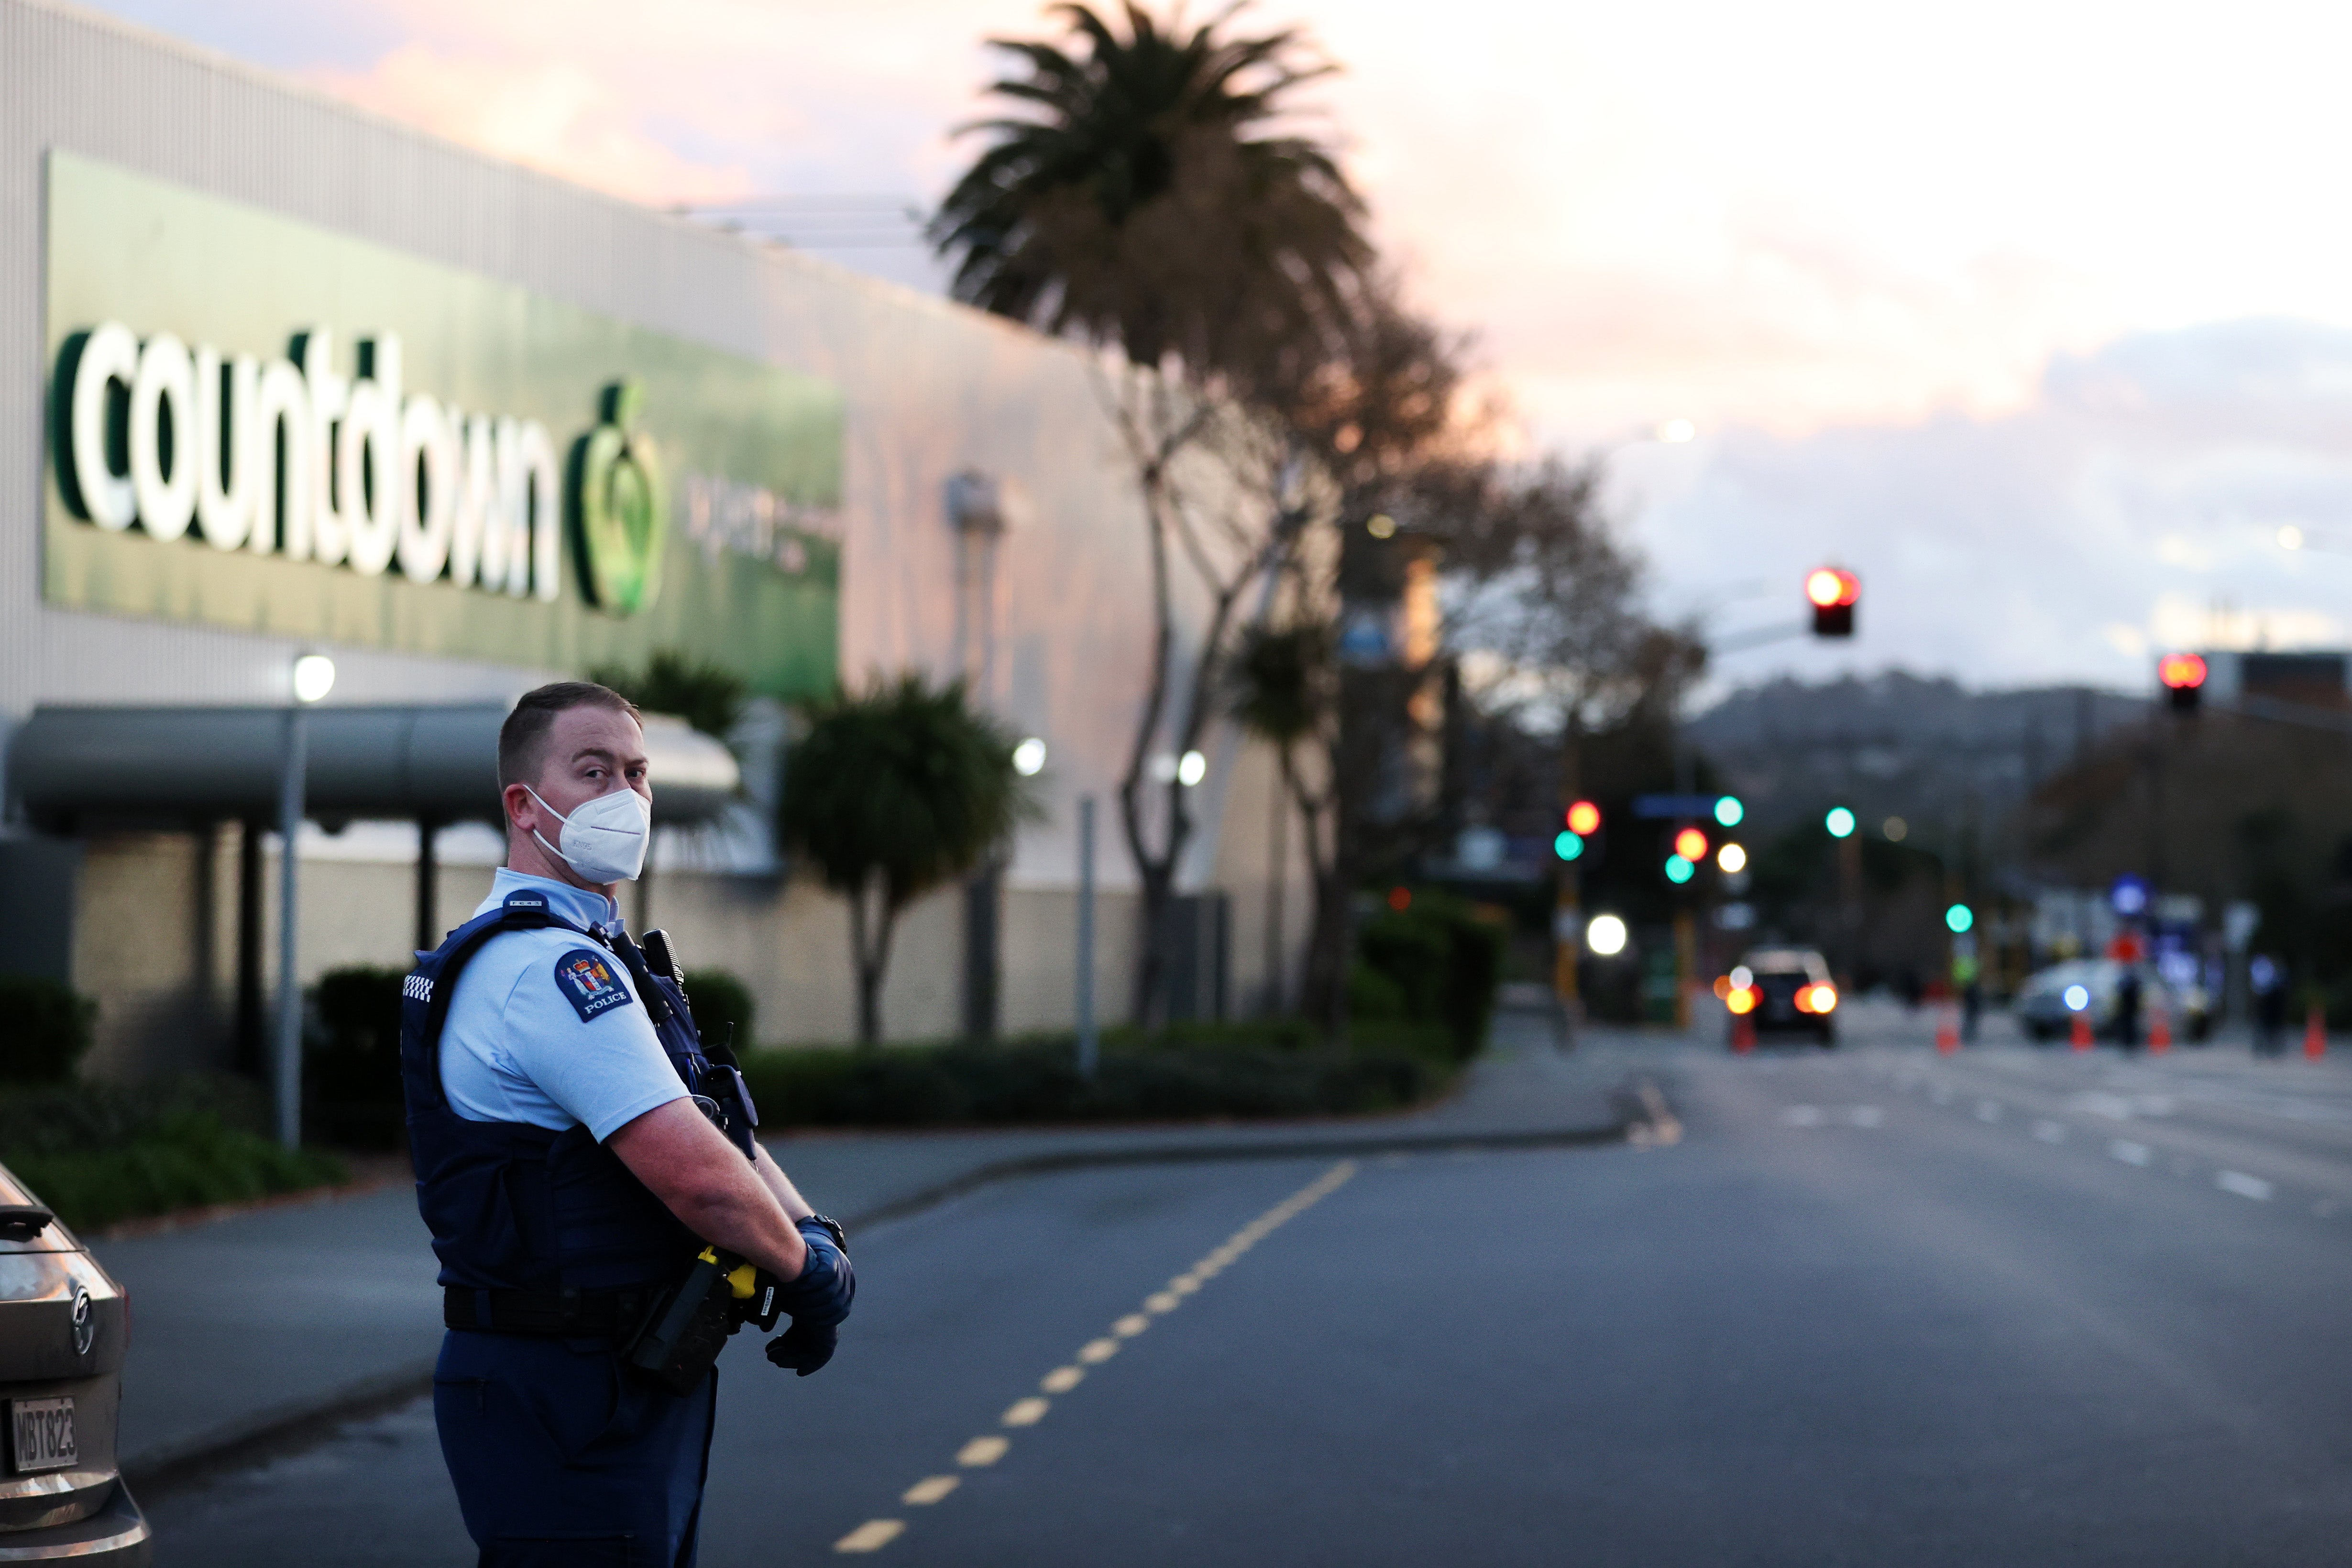 Police guard the area around Countdown LynnMall after the attack